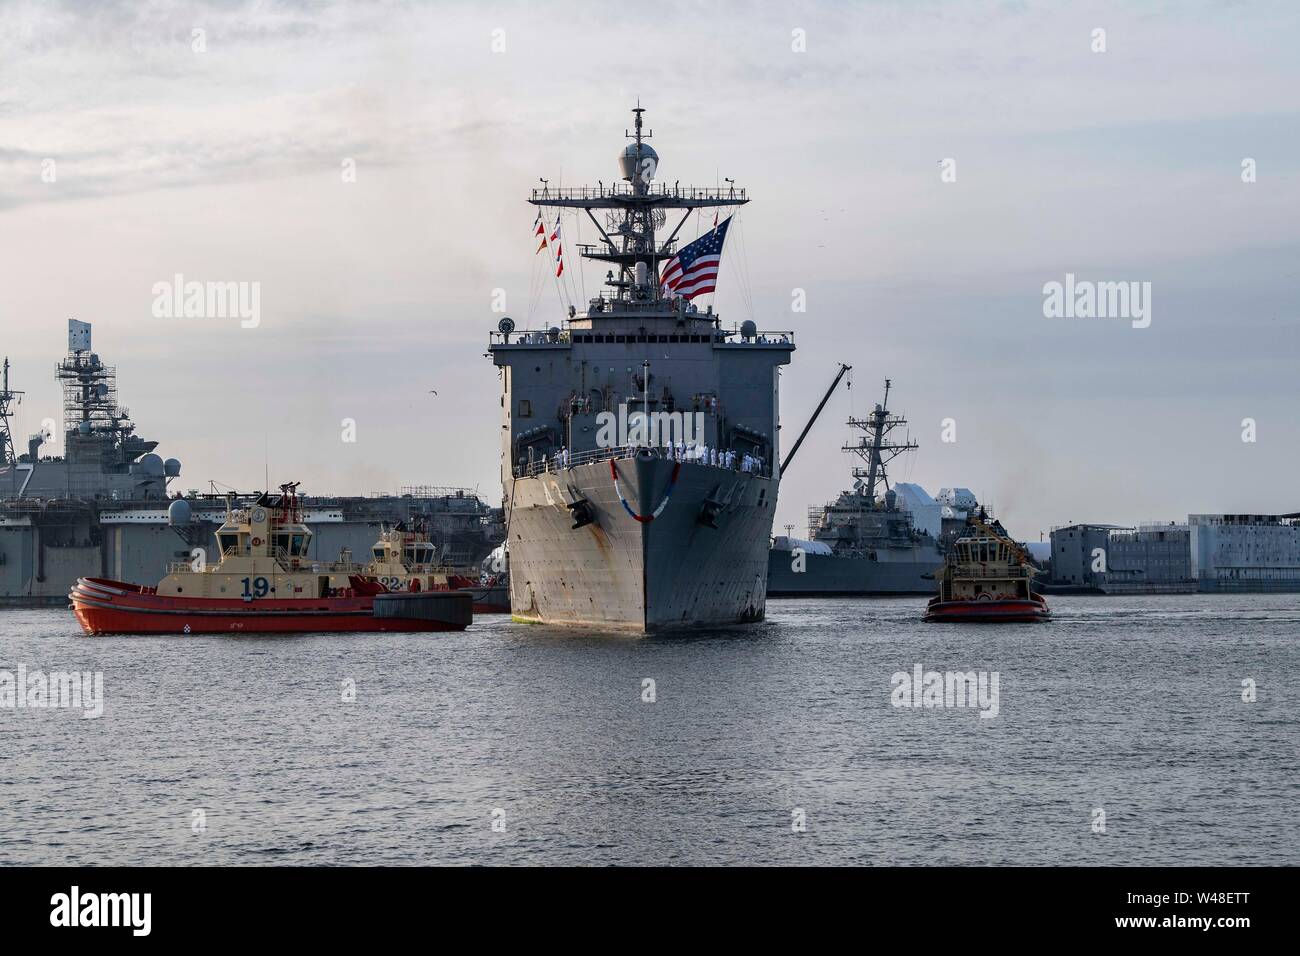 190718-N-QI061-132 MAYPORT, Fla. (July 18, 2019) The Whidbey Island-class amphibious dock landing ship USS Fort McHenry (LSD 43) pulls into Naval Station Mayport, Fla. Fort McHenry completed a scheduled deployment as part of the Kearsarge Amphibious Ready Group in support of maritime security operations, crisis response and theater security cooperation, while also providing a forward naval presence. (U.S. Navy photo by Mass Communication Specialist 3rd Class Nathan T. Beard/Released) Stock Photo